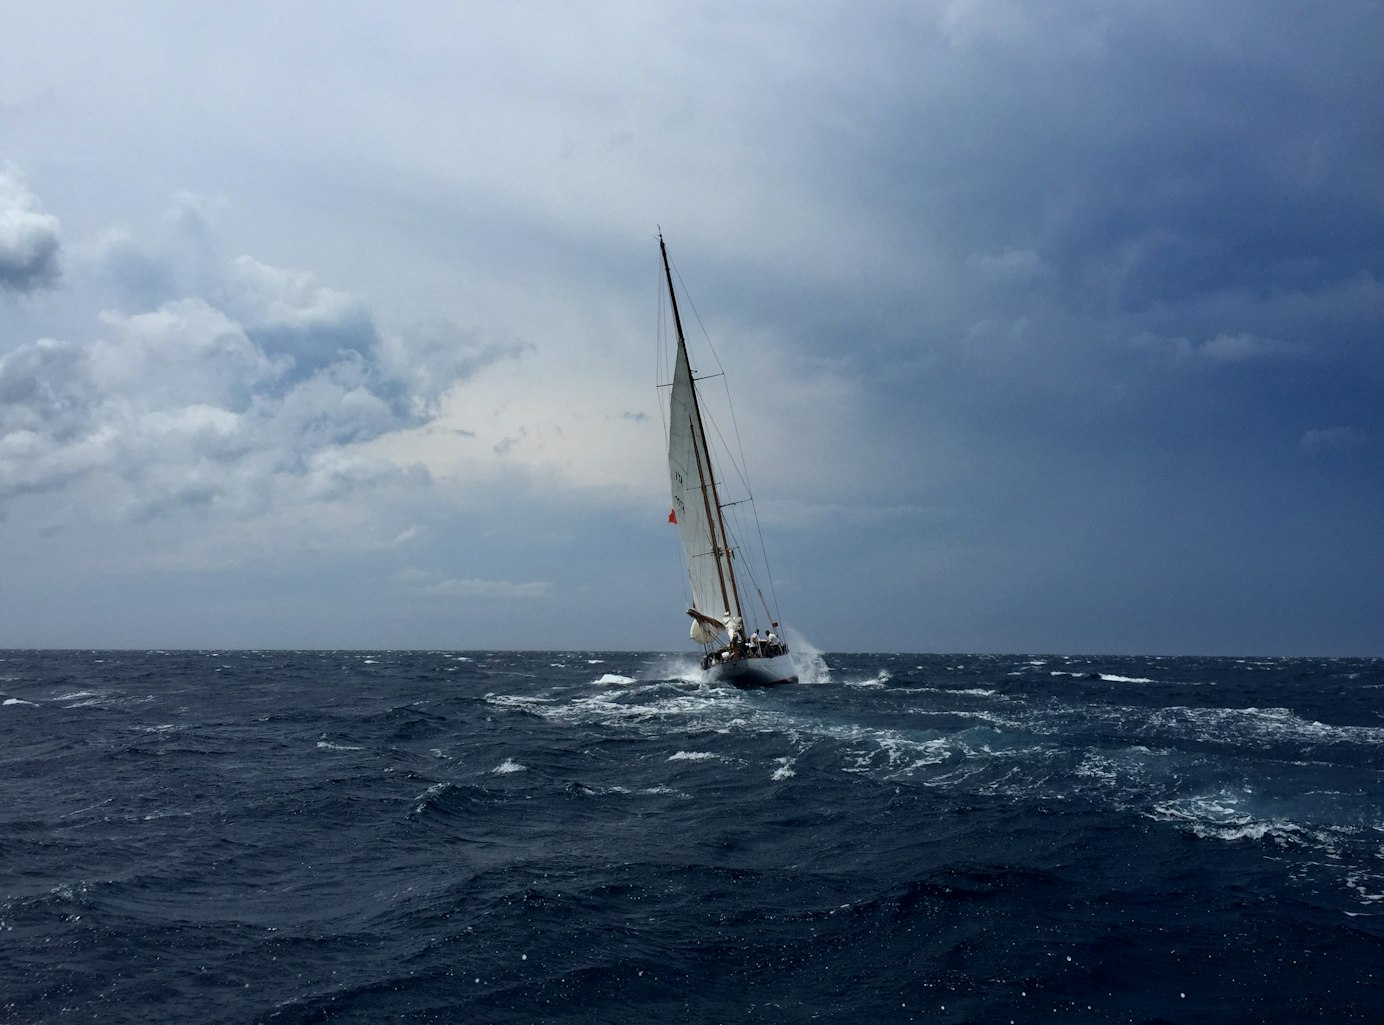 Boat navigating weather and stormy seas